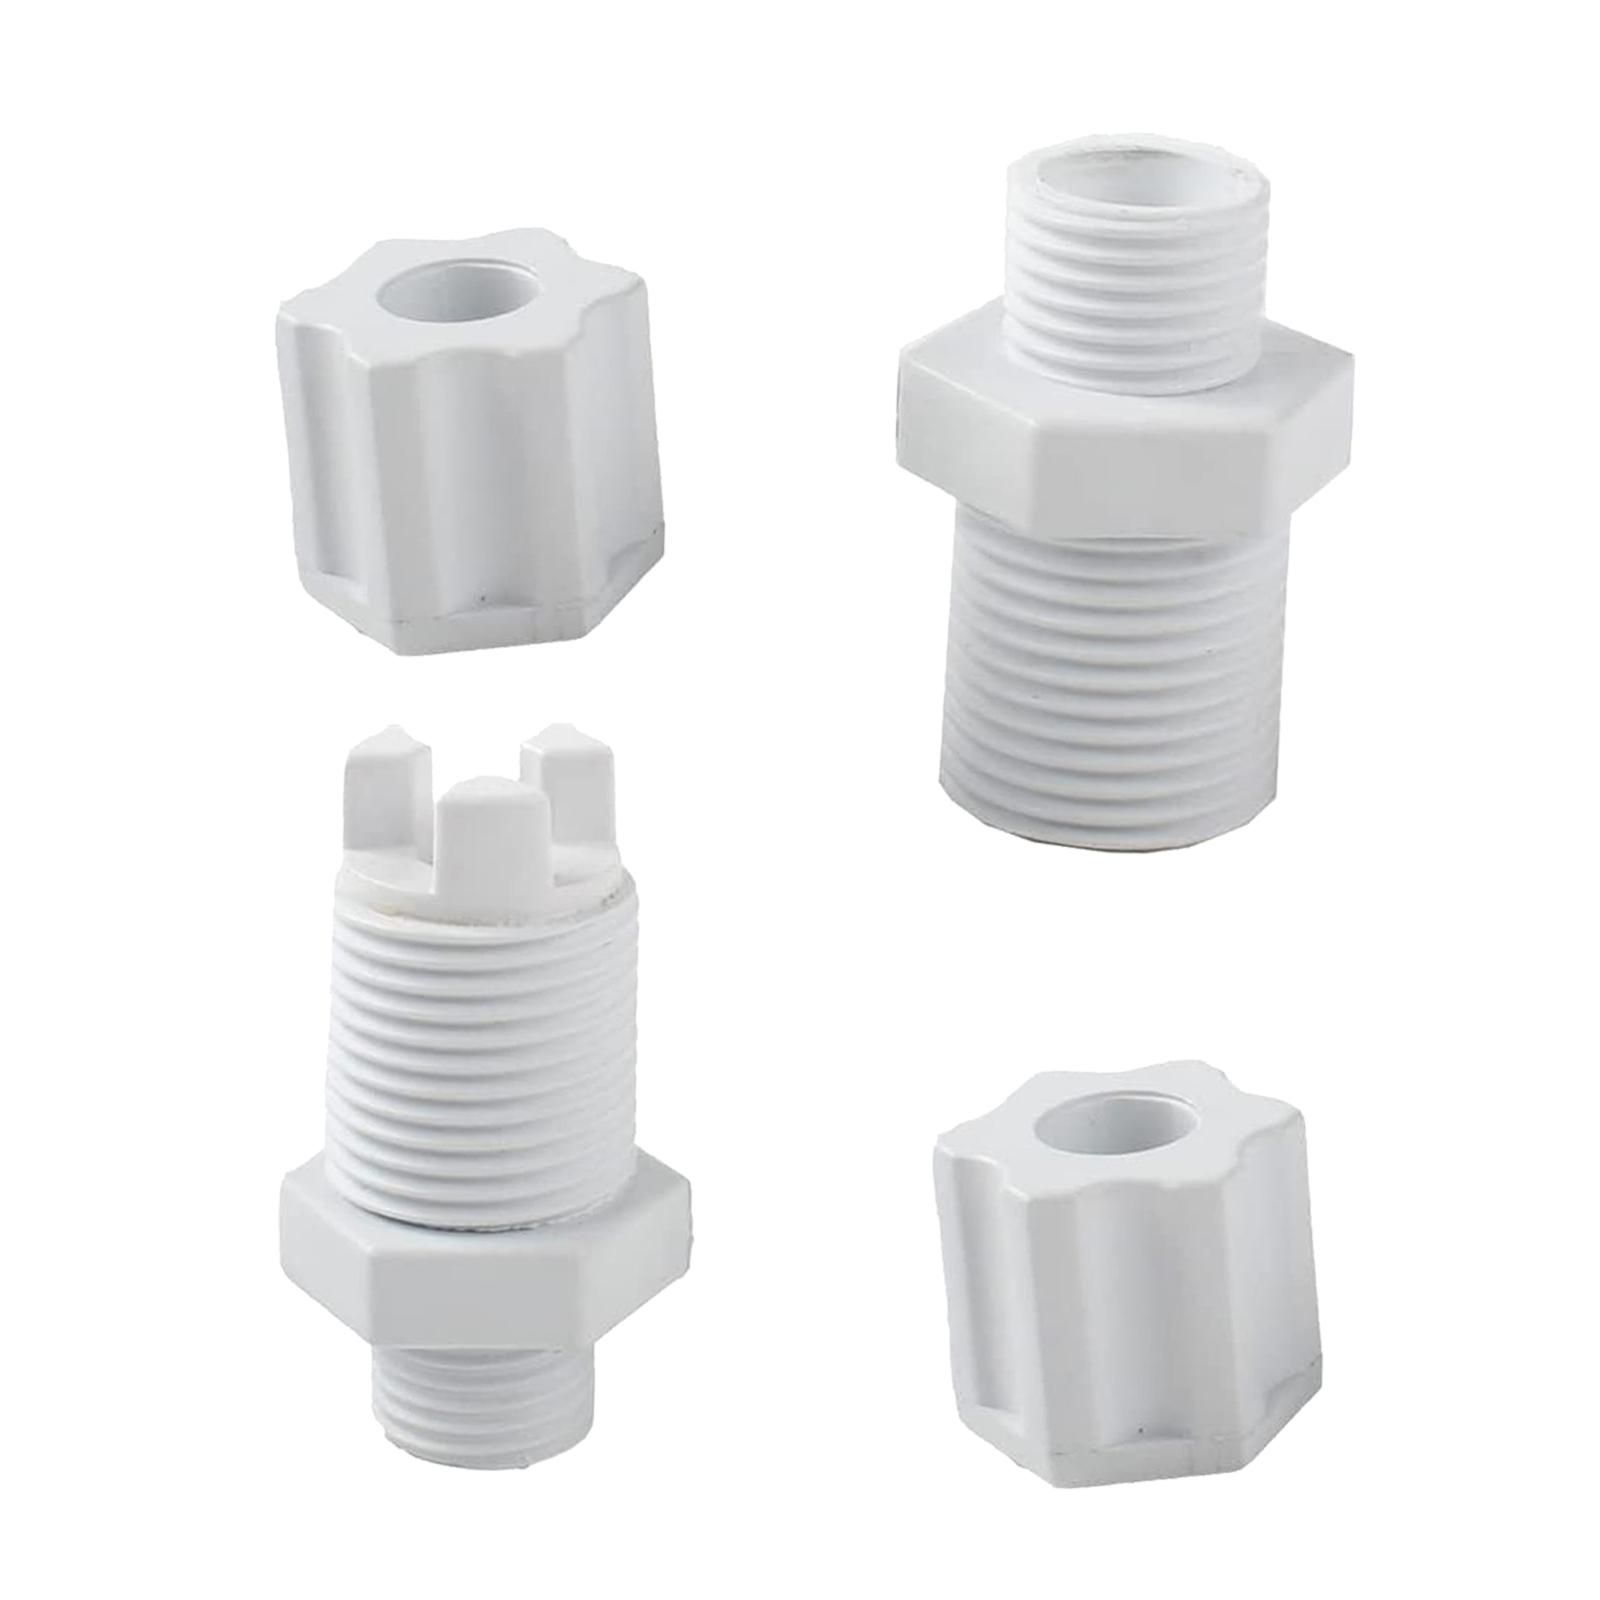 2 Pieces Replace Clorinator Parts Easy to Install Stable 1/4